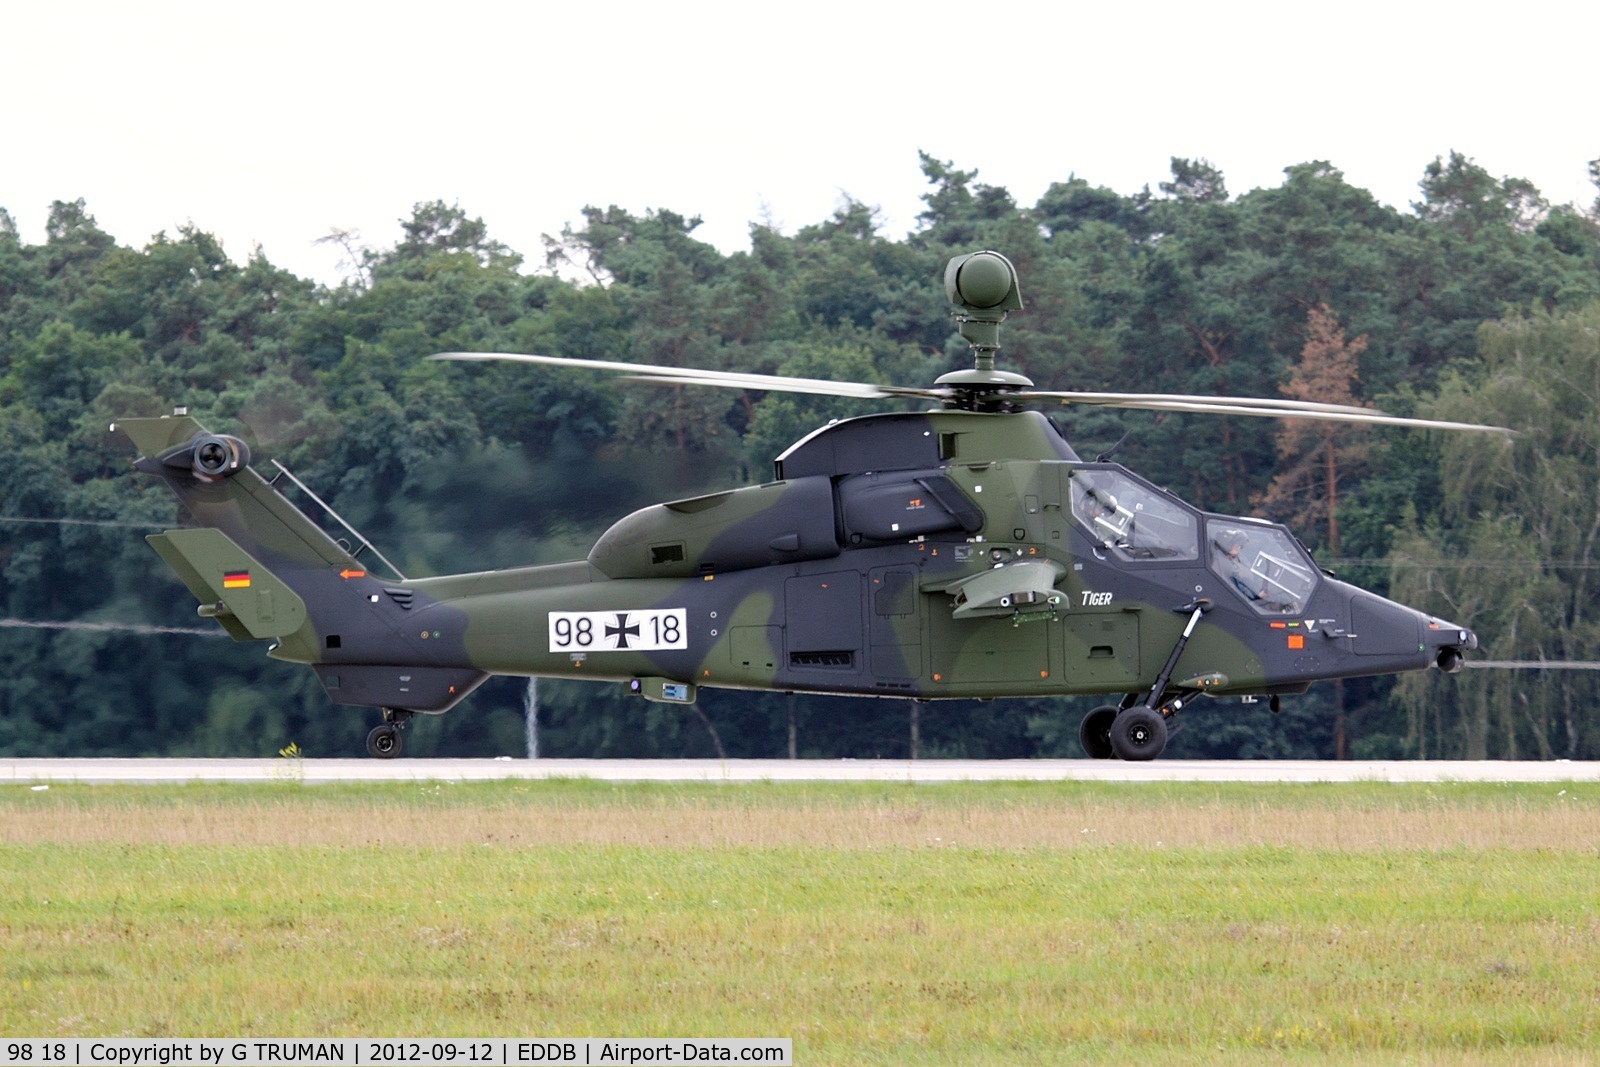 98 18, Eurocopter EC-665 Tiger UHT C/N 1004/UHT04, Taxying into the flightline/static after its display at ILA 2012